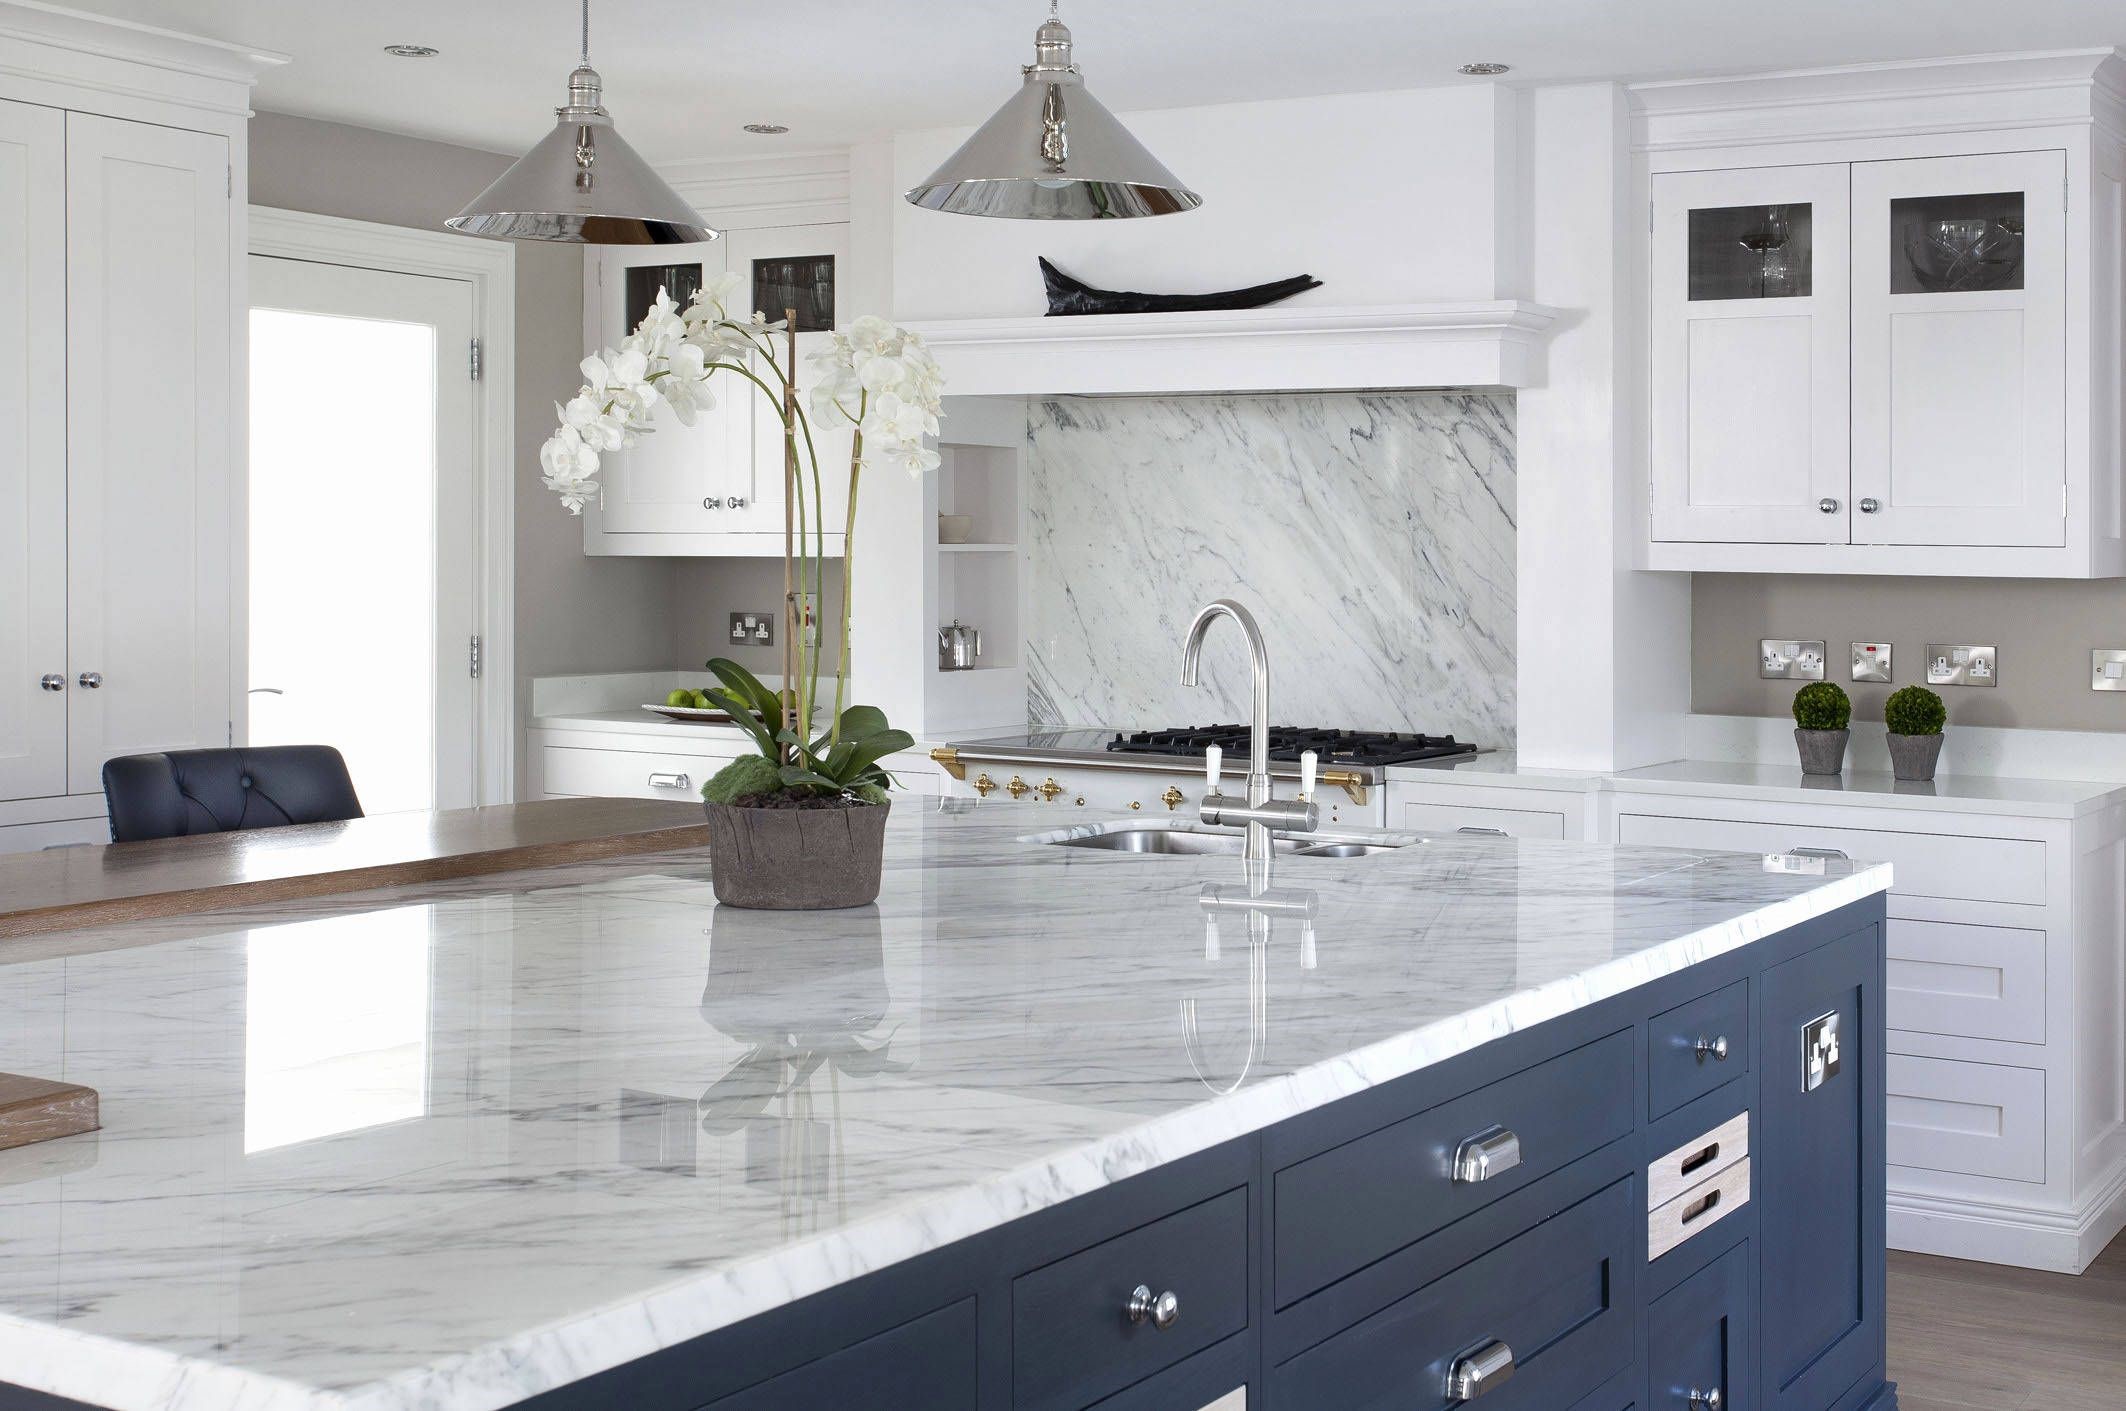 Make Your Kitchen And Bathroom More Beautiful With Quartz Countertops ...